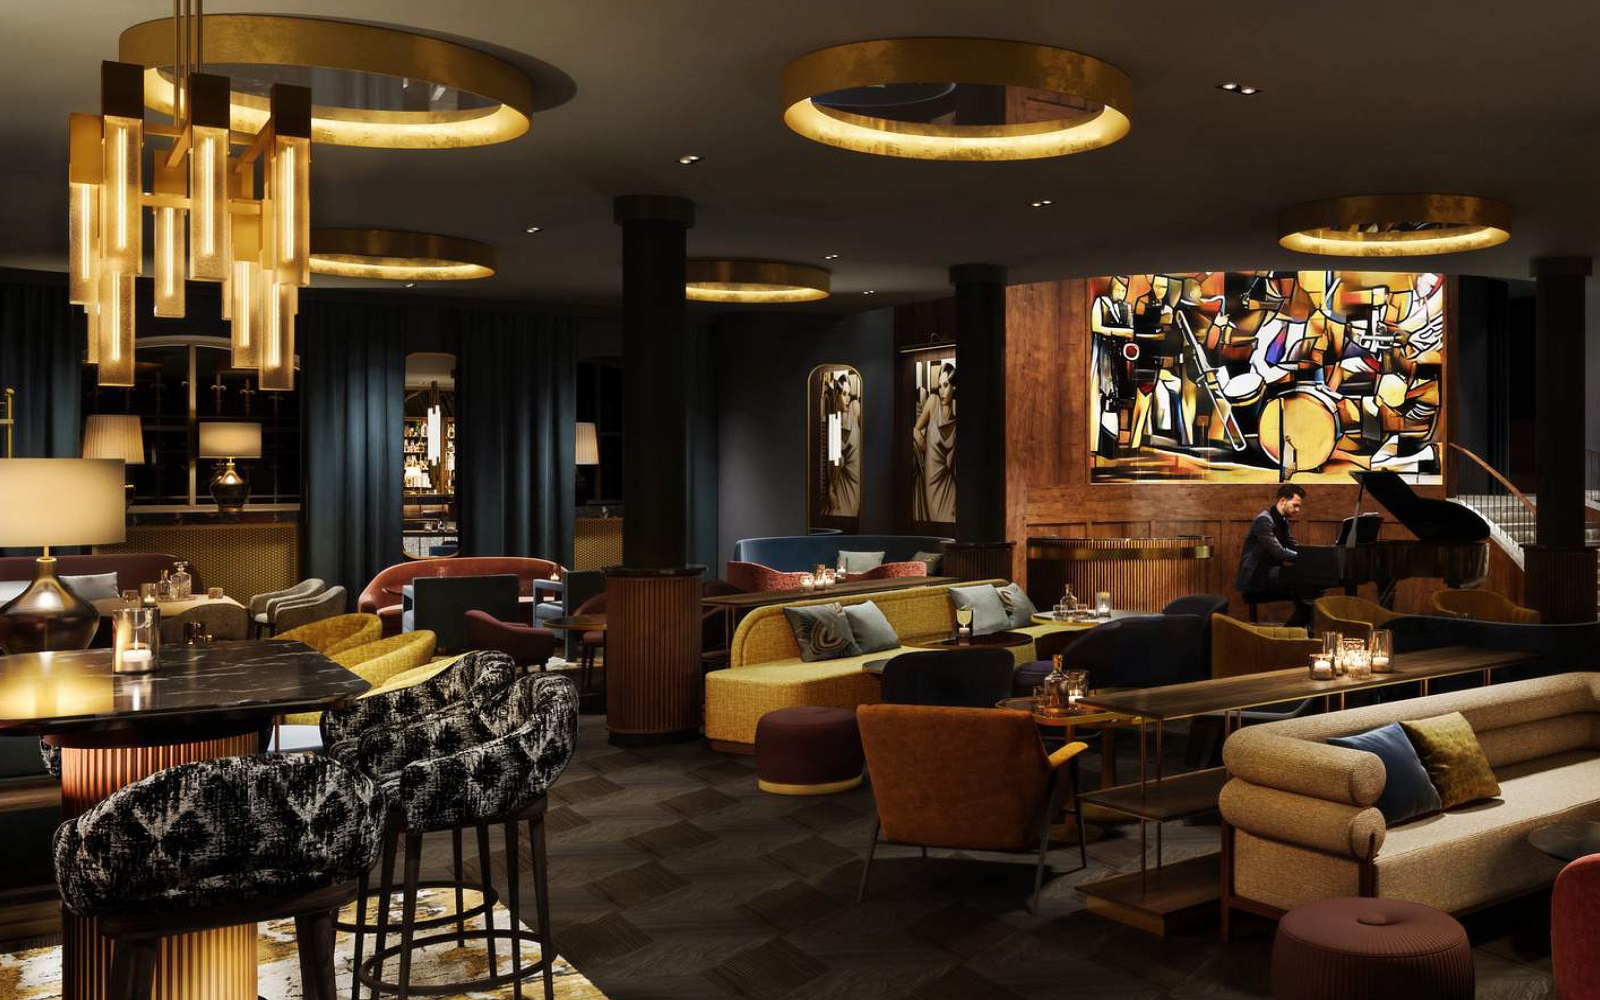 dark, moody bar in rosewood Munich with focus lighting and statement mural on the wall